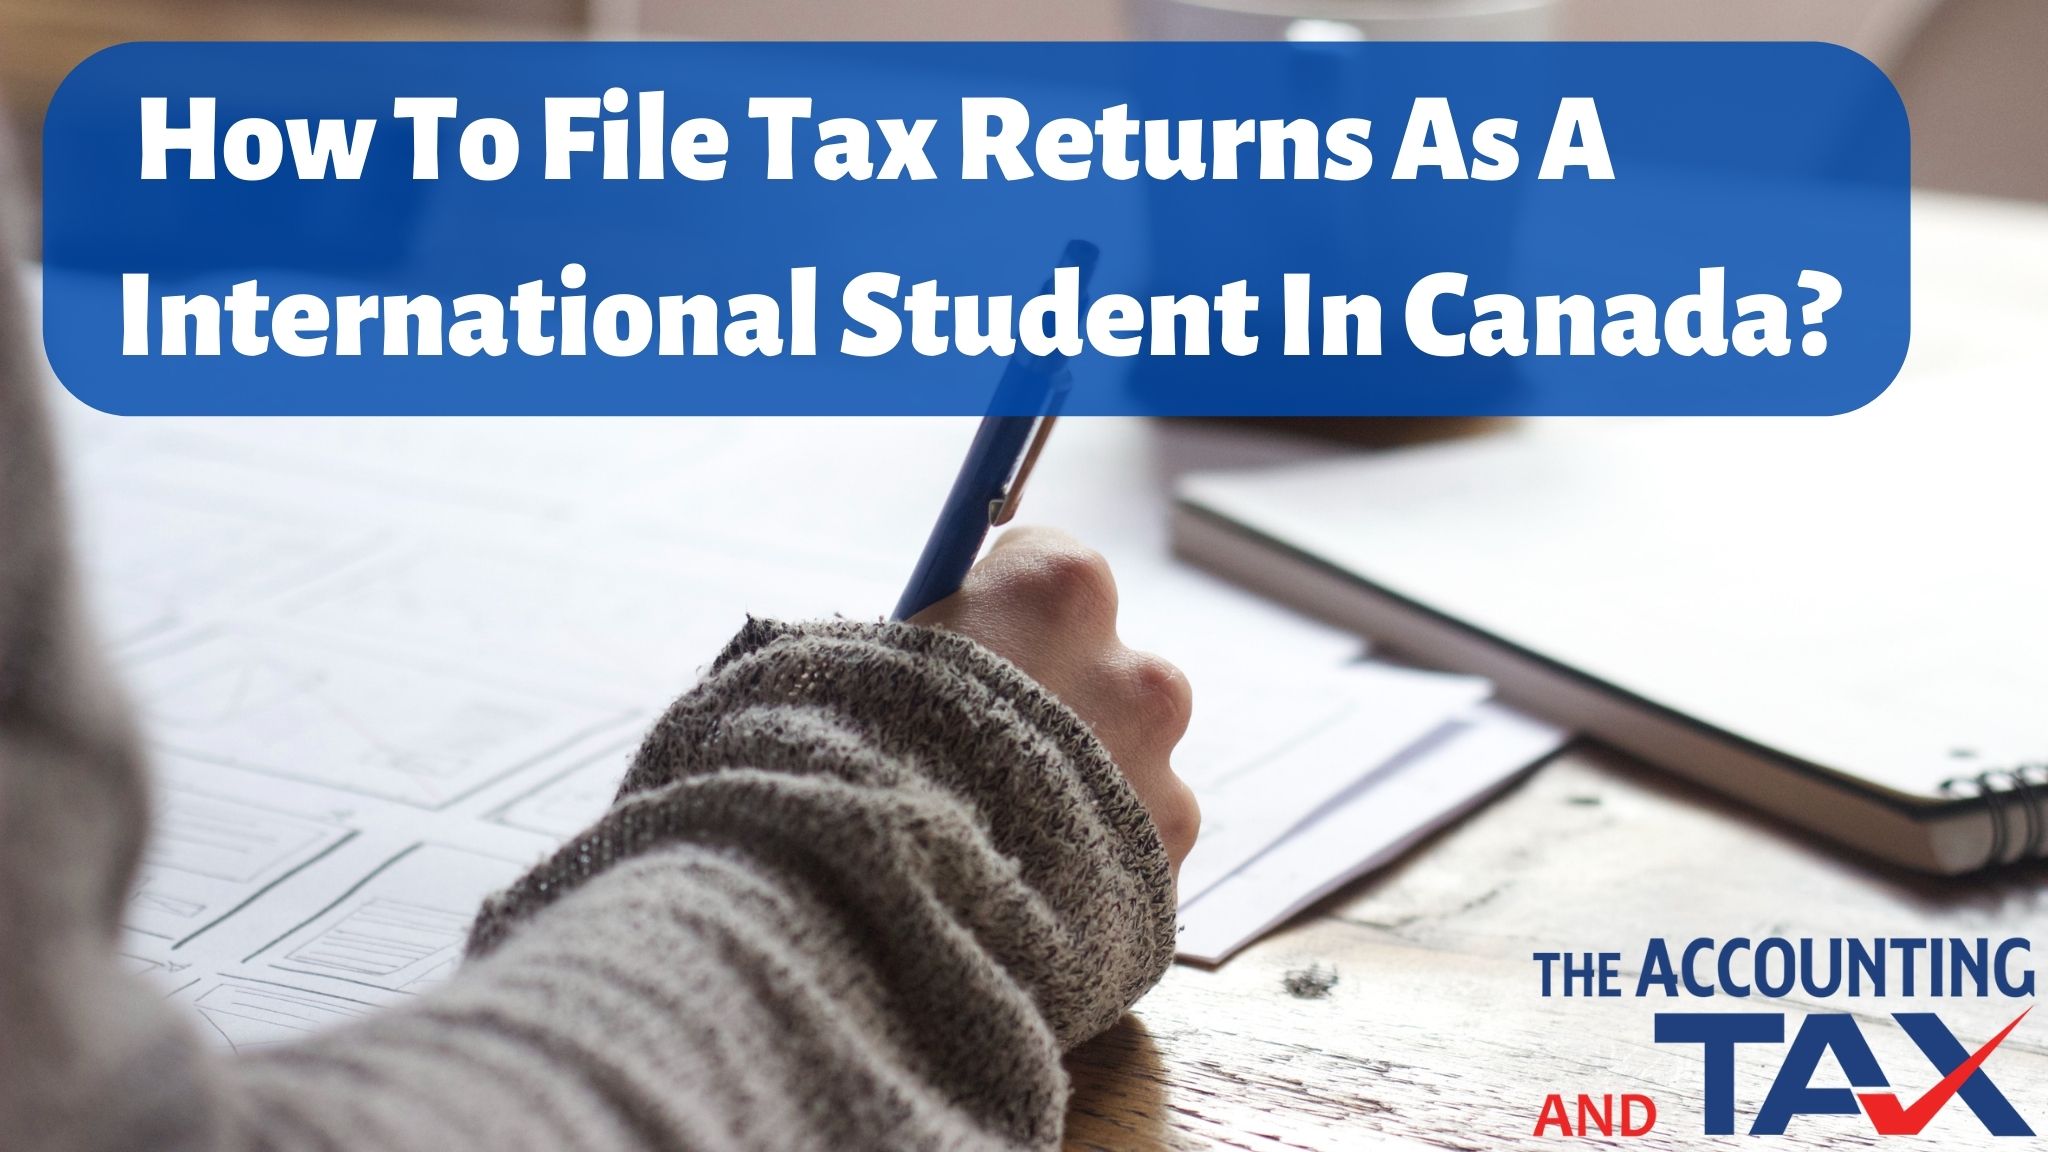 How can international students file tax returns in Canada?